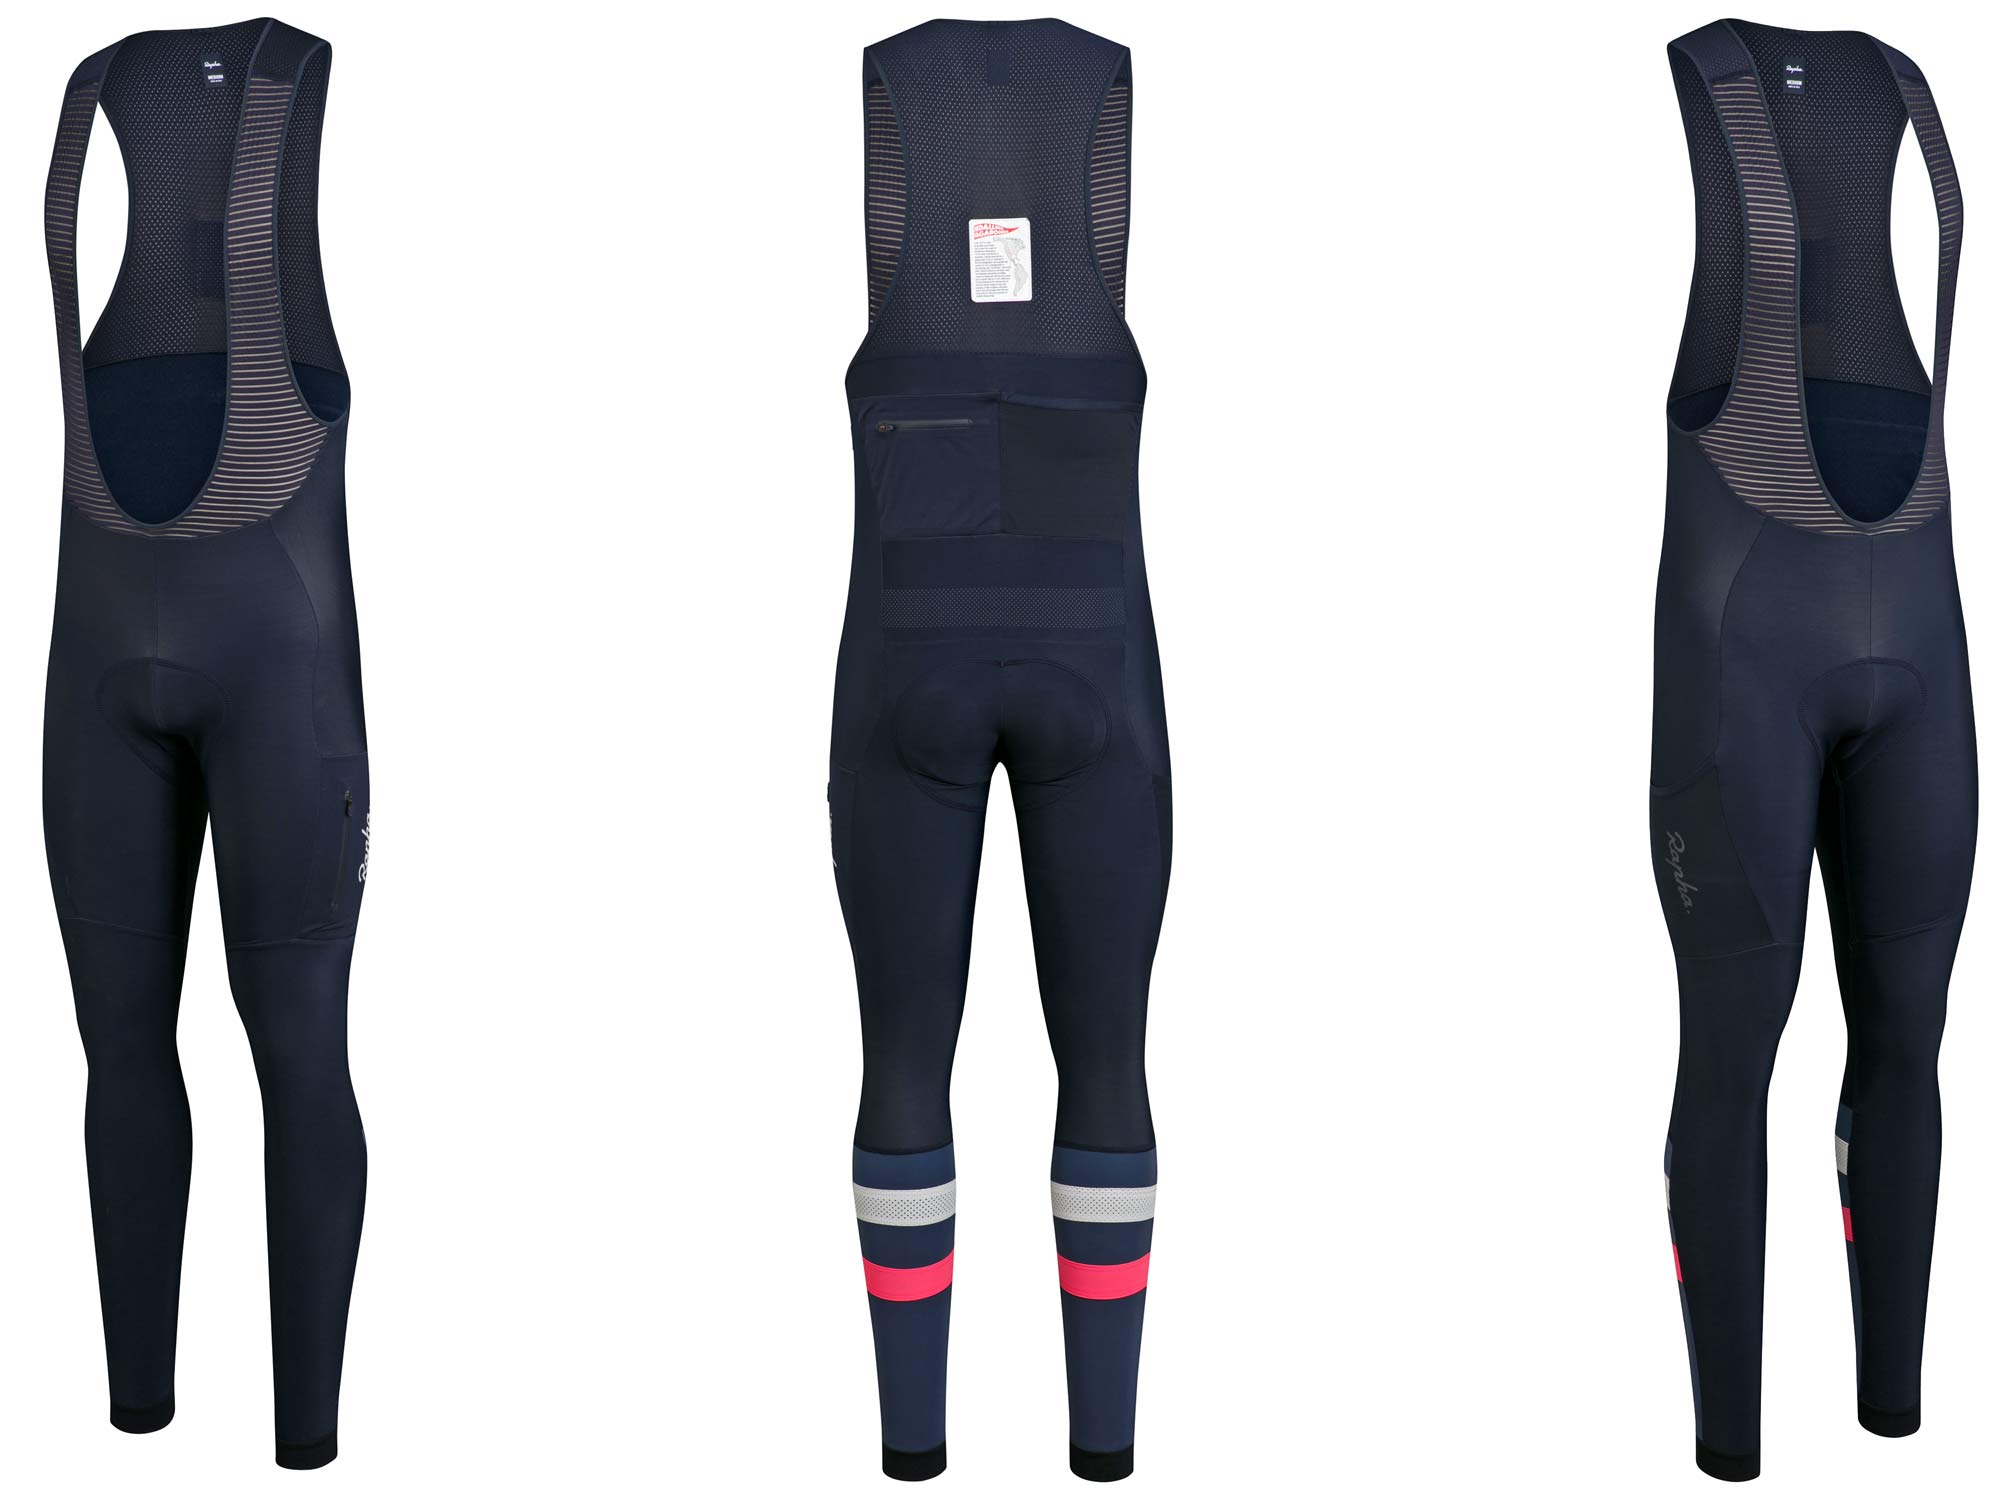 Rapha Explore Cargo Winter Tights for bikepacking